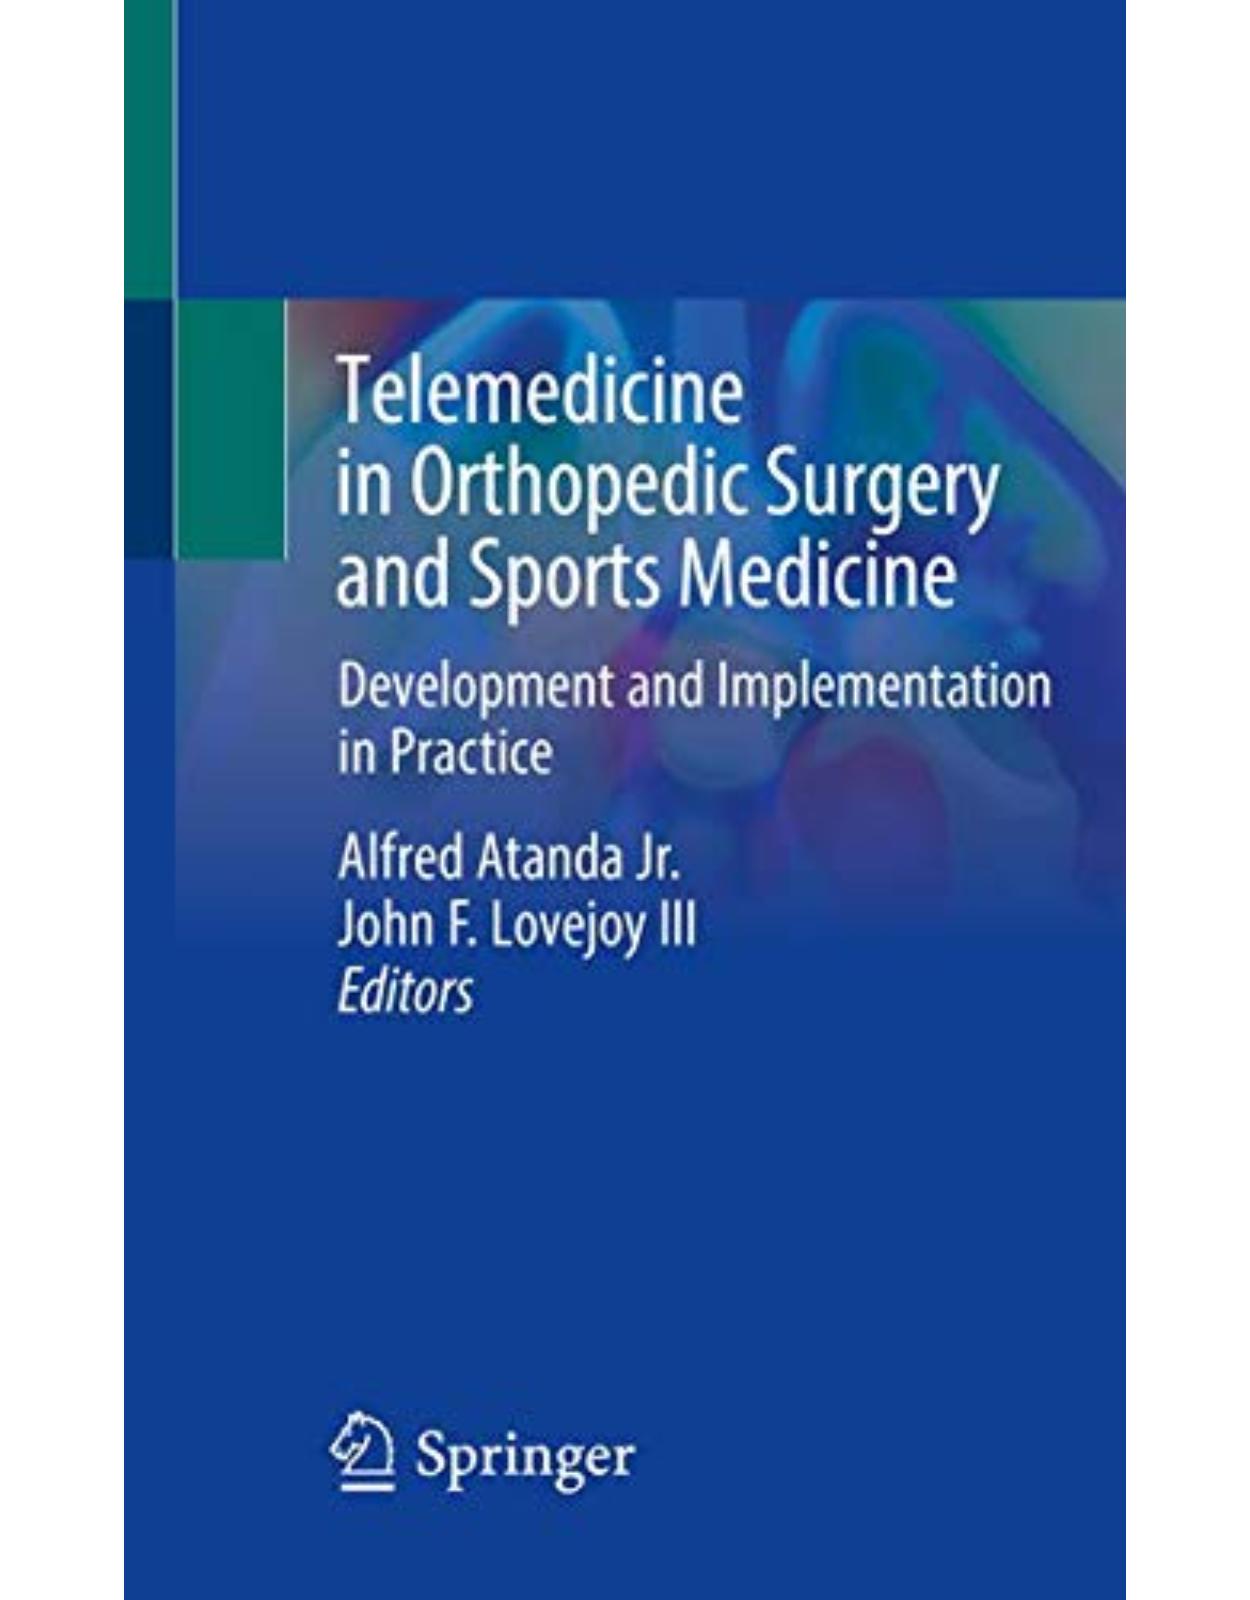 Telemedicine in Orthopedic Surgery and Sports Medicine: Development and Implementation in Practice